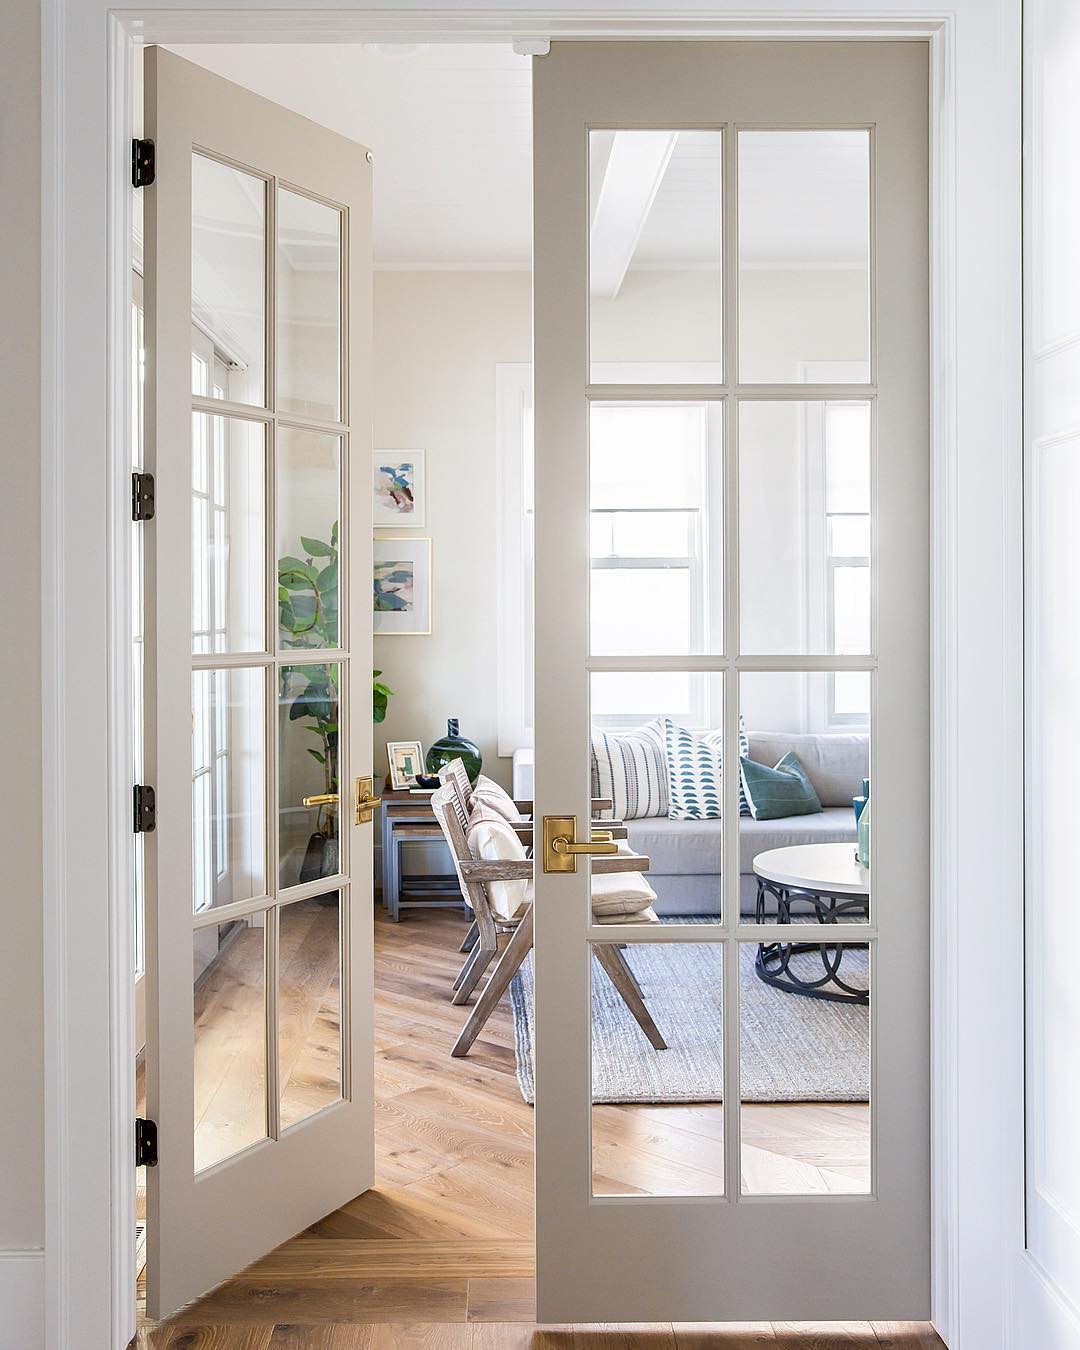 French-style doors opening into living room. Photo by Instagram user @sitamontgomeryinteriors